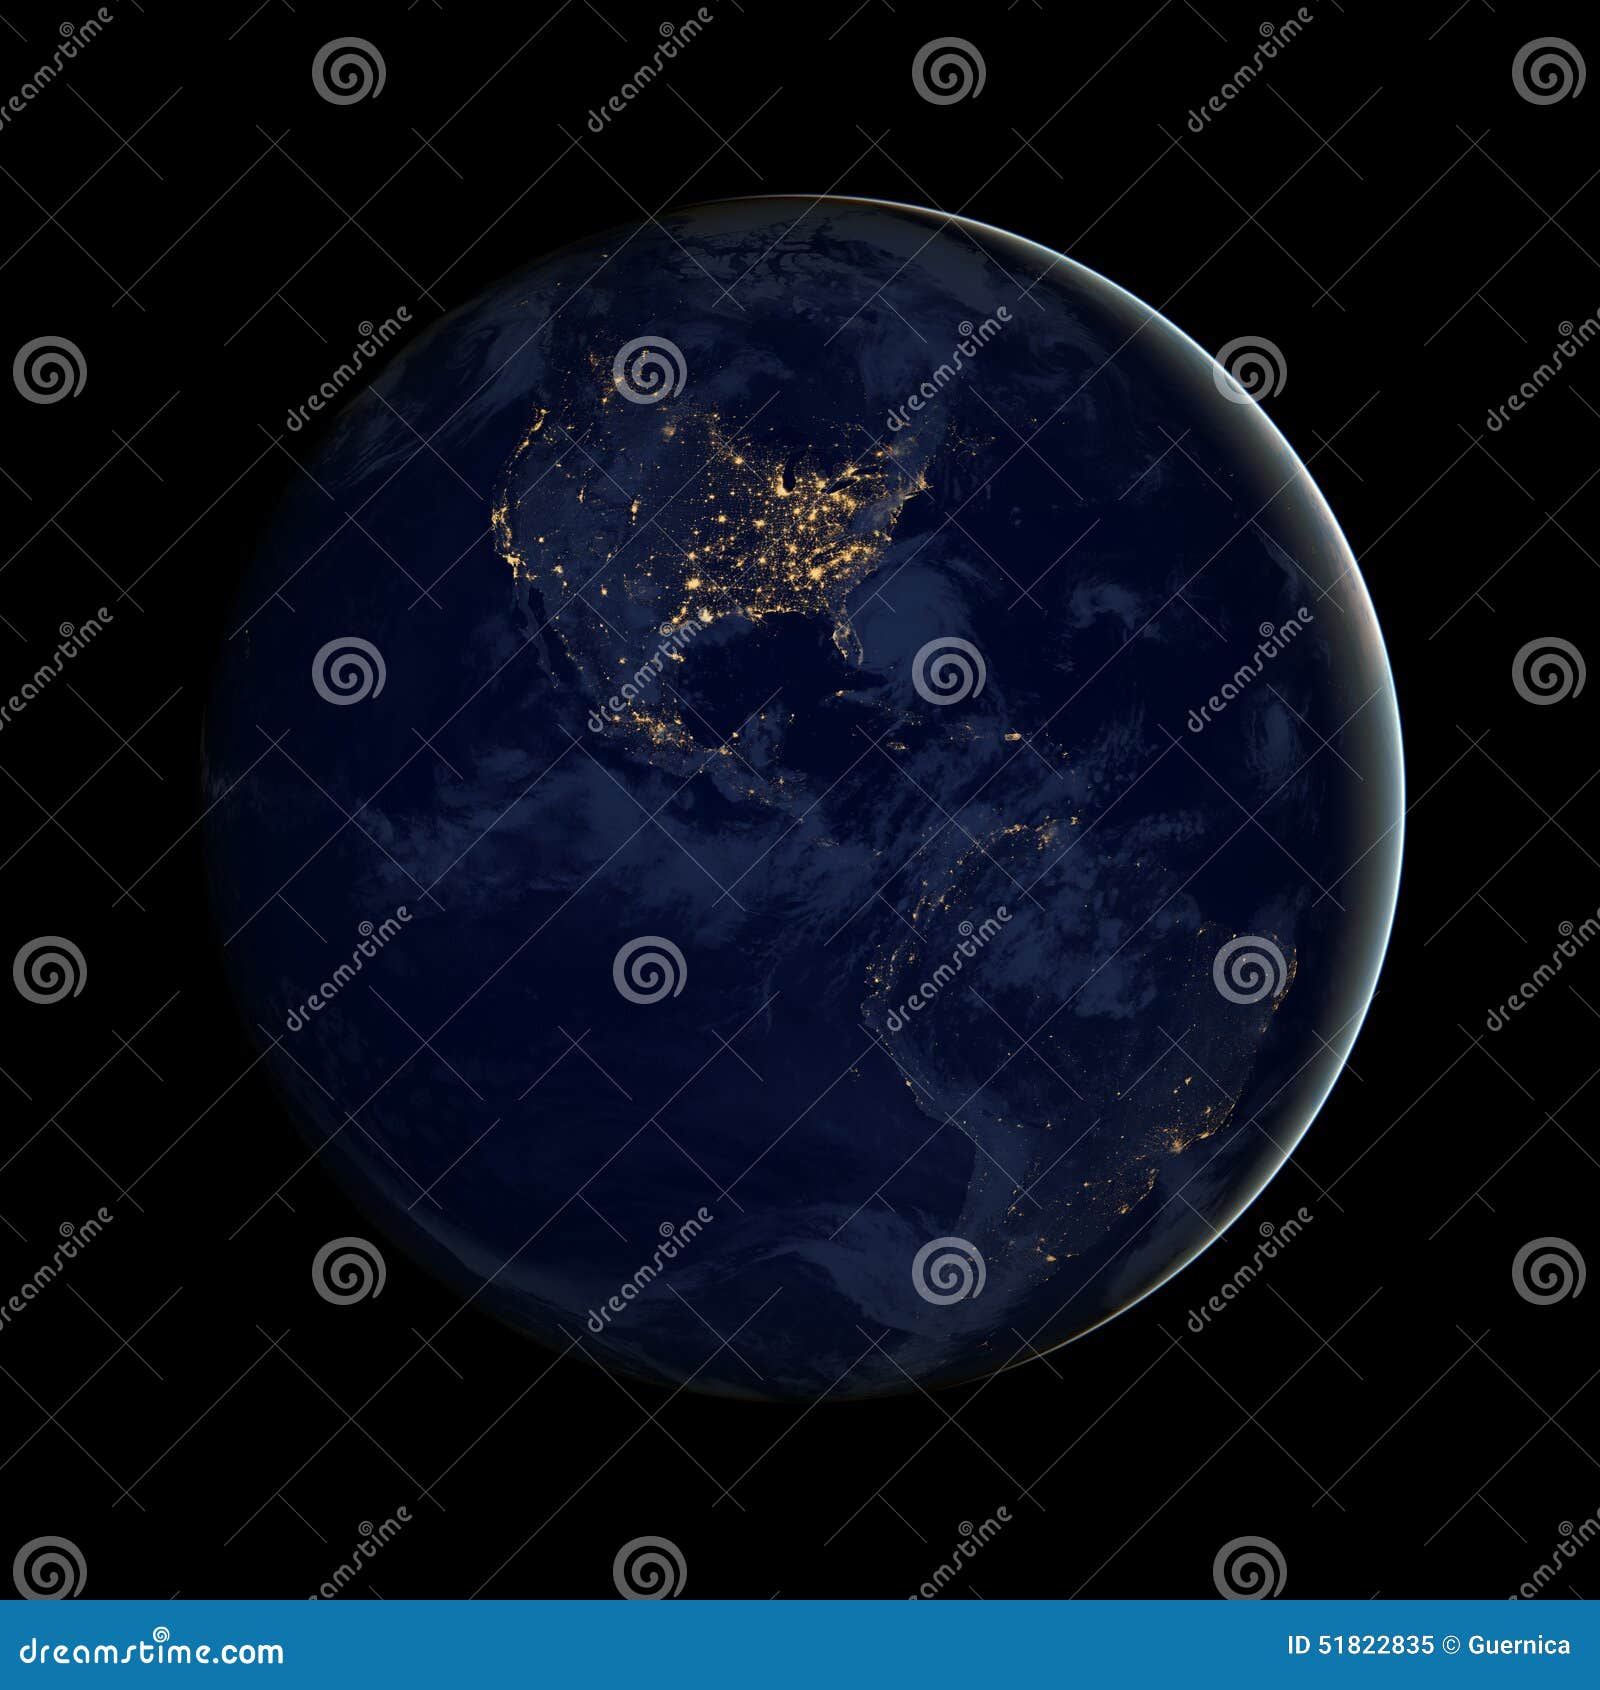 americas, north and south america city lights of the western hemisphere